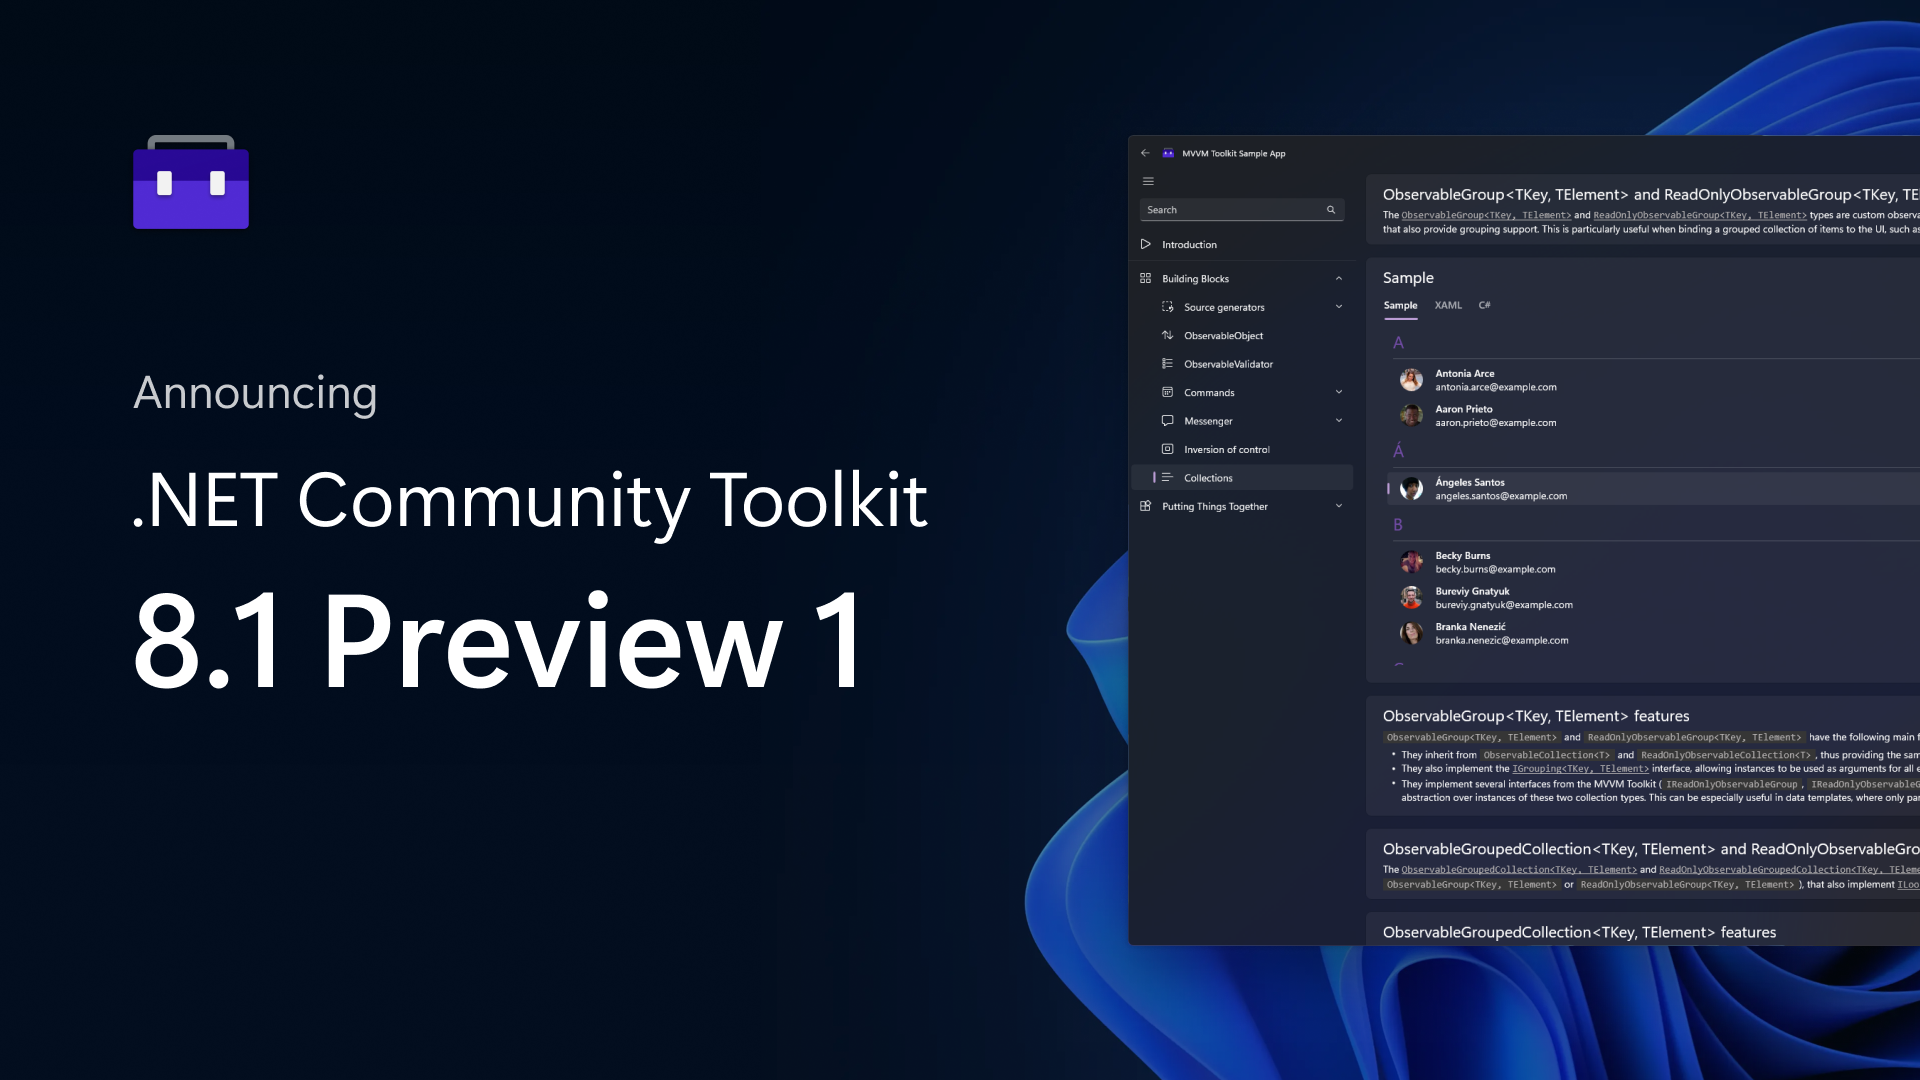 Announcing .NET Community Toolkit v8.1.0 Preview 1